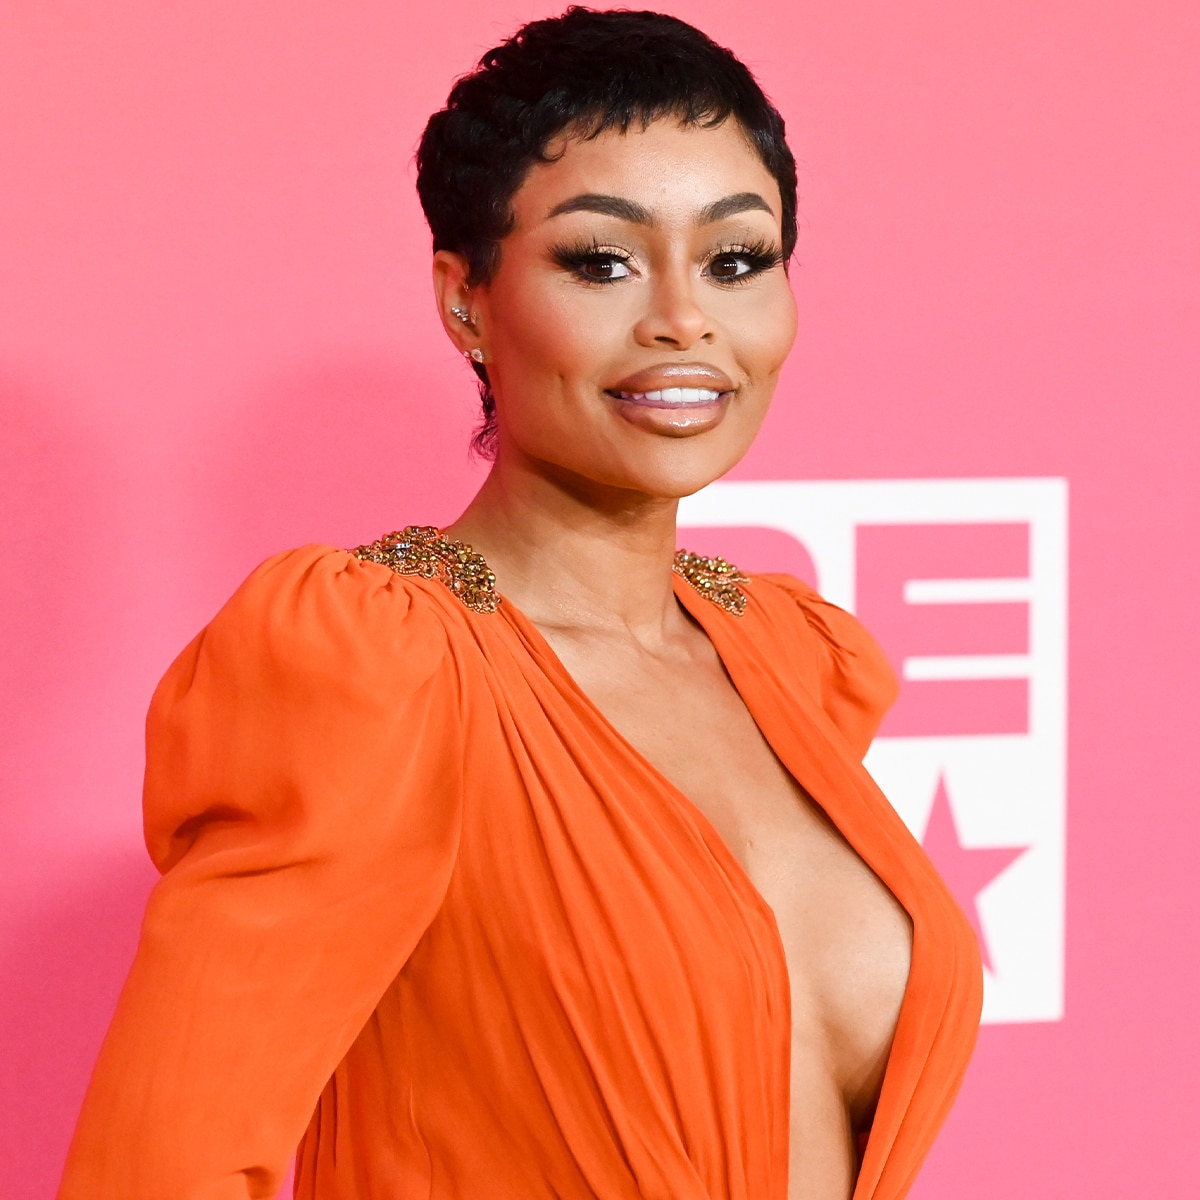 Blac Chyna Reflects on Her Past